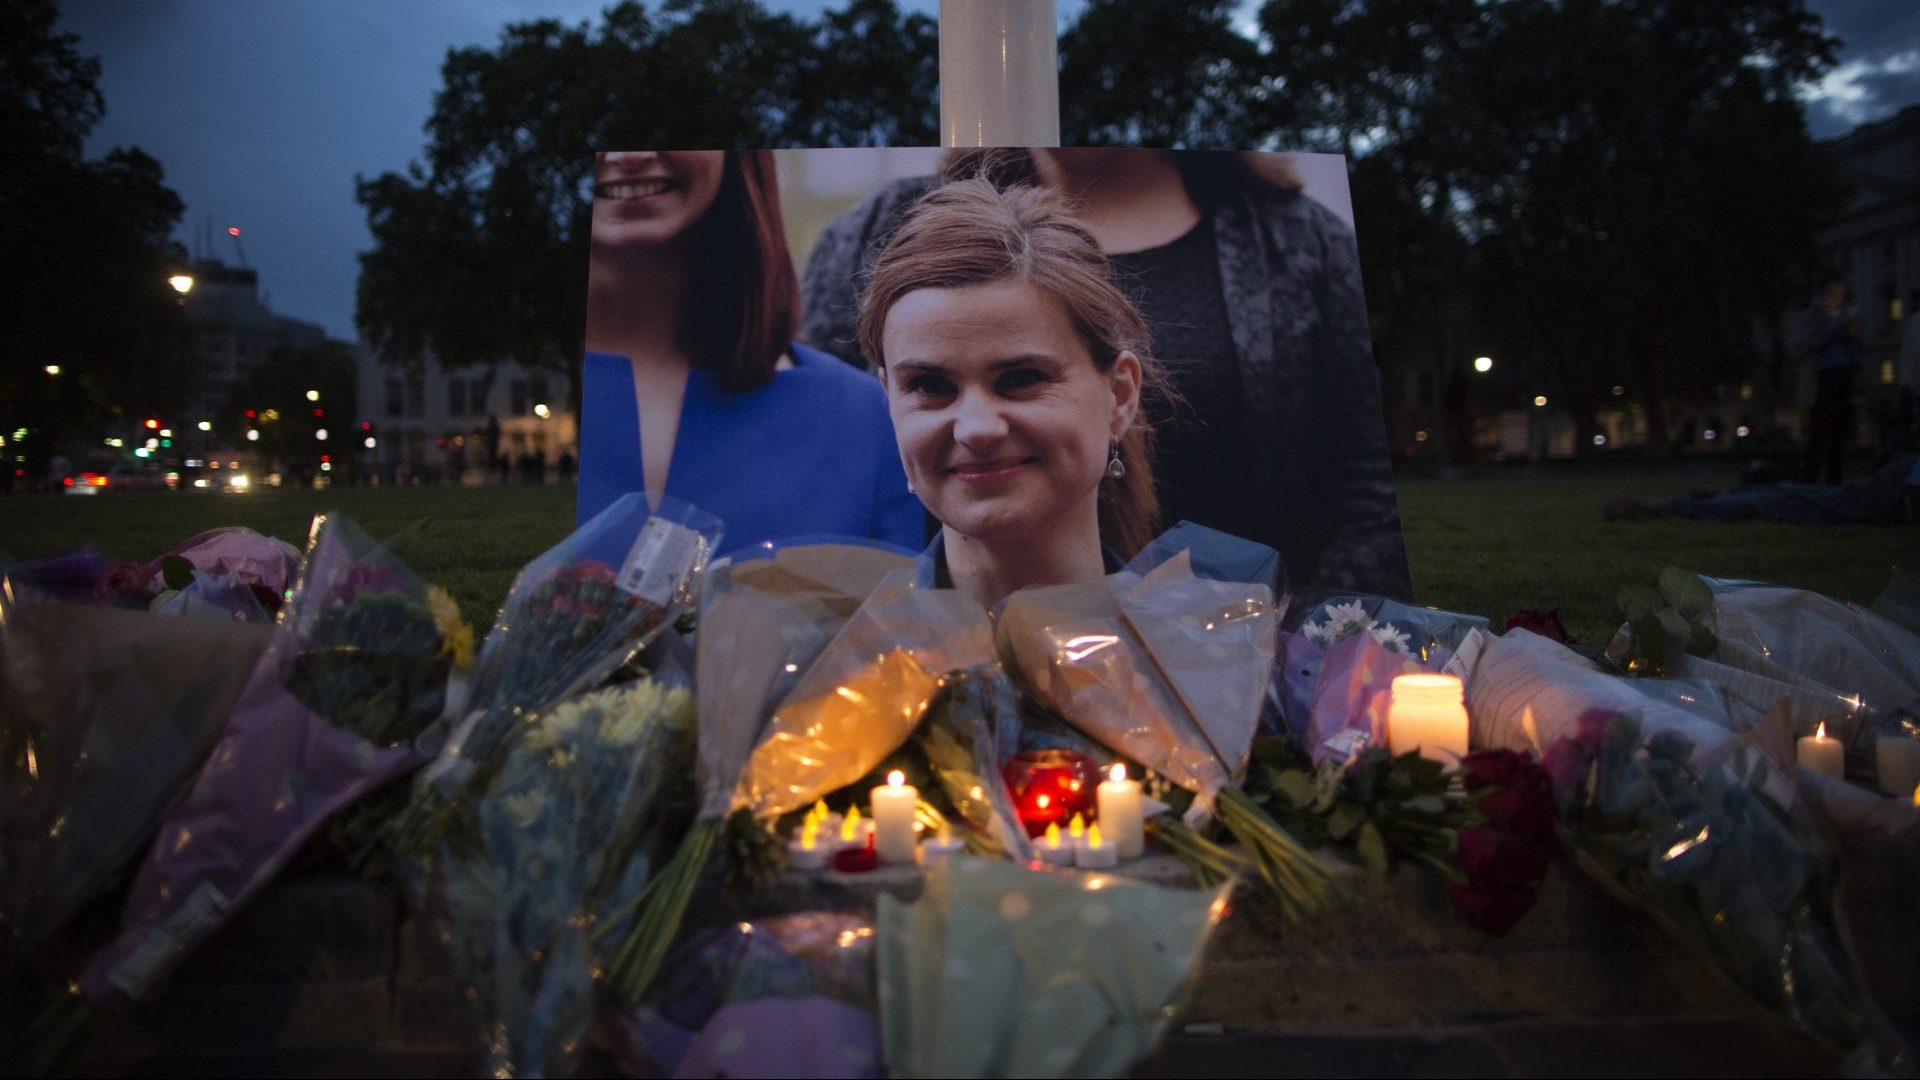  Flowers surround a picture of Jo Cox during a vigil in Parliament Square on June 16, 2016. Photo: Dan Kitwood/Getty Images